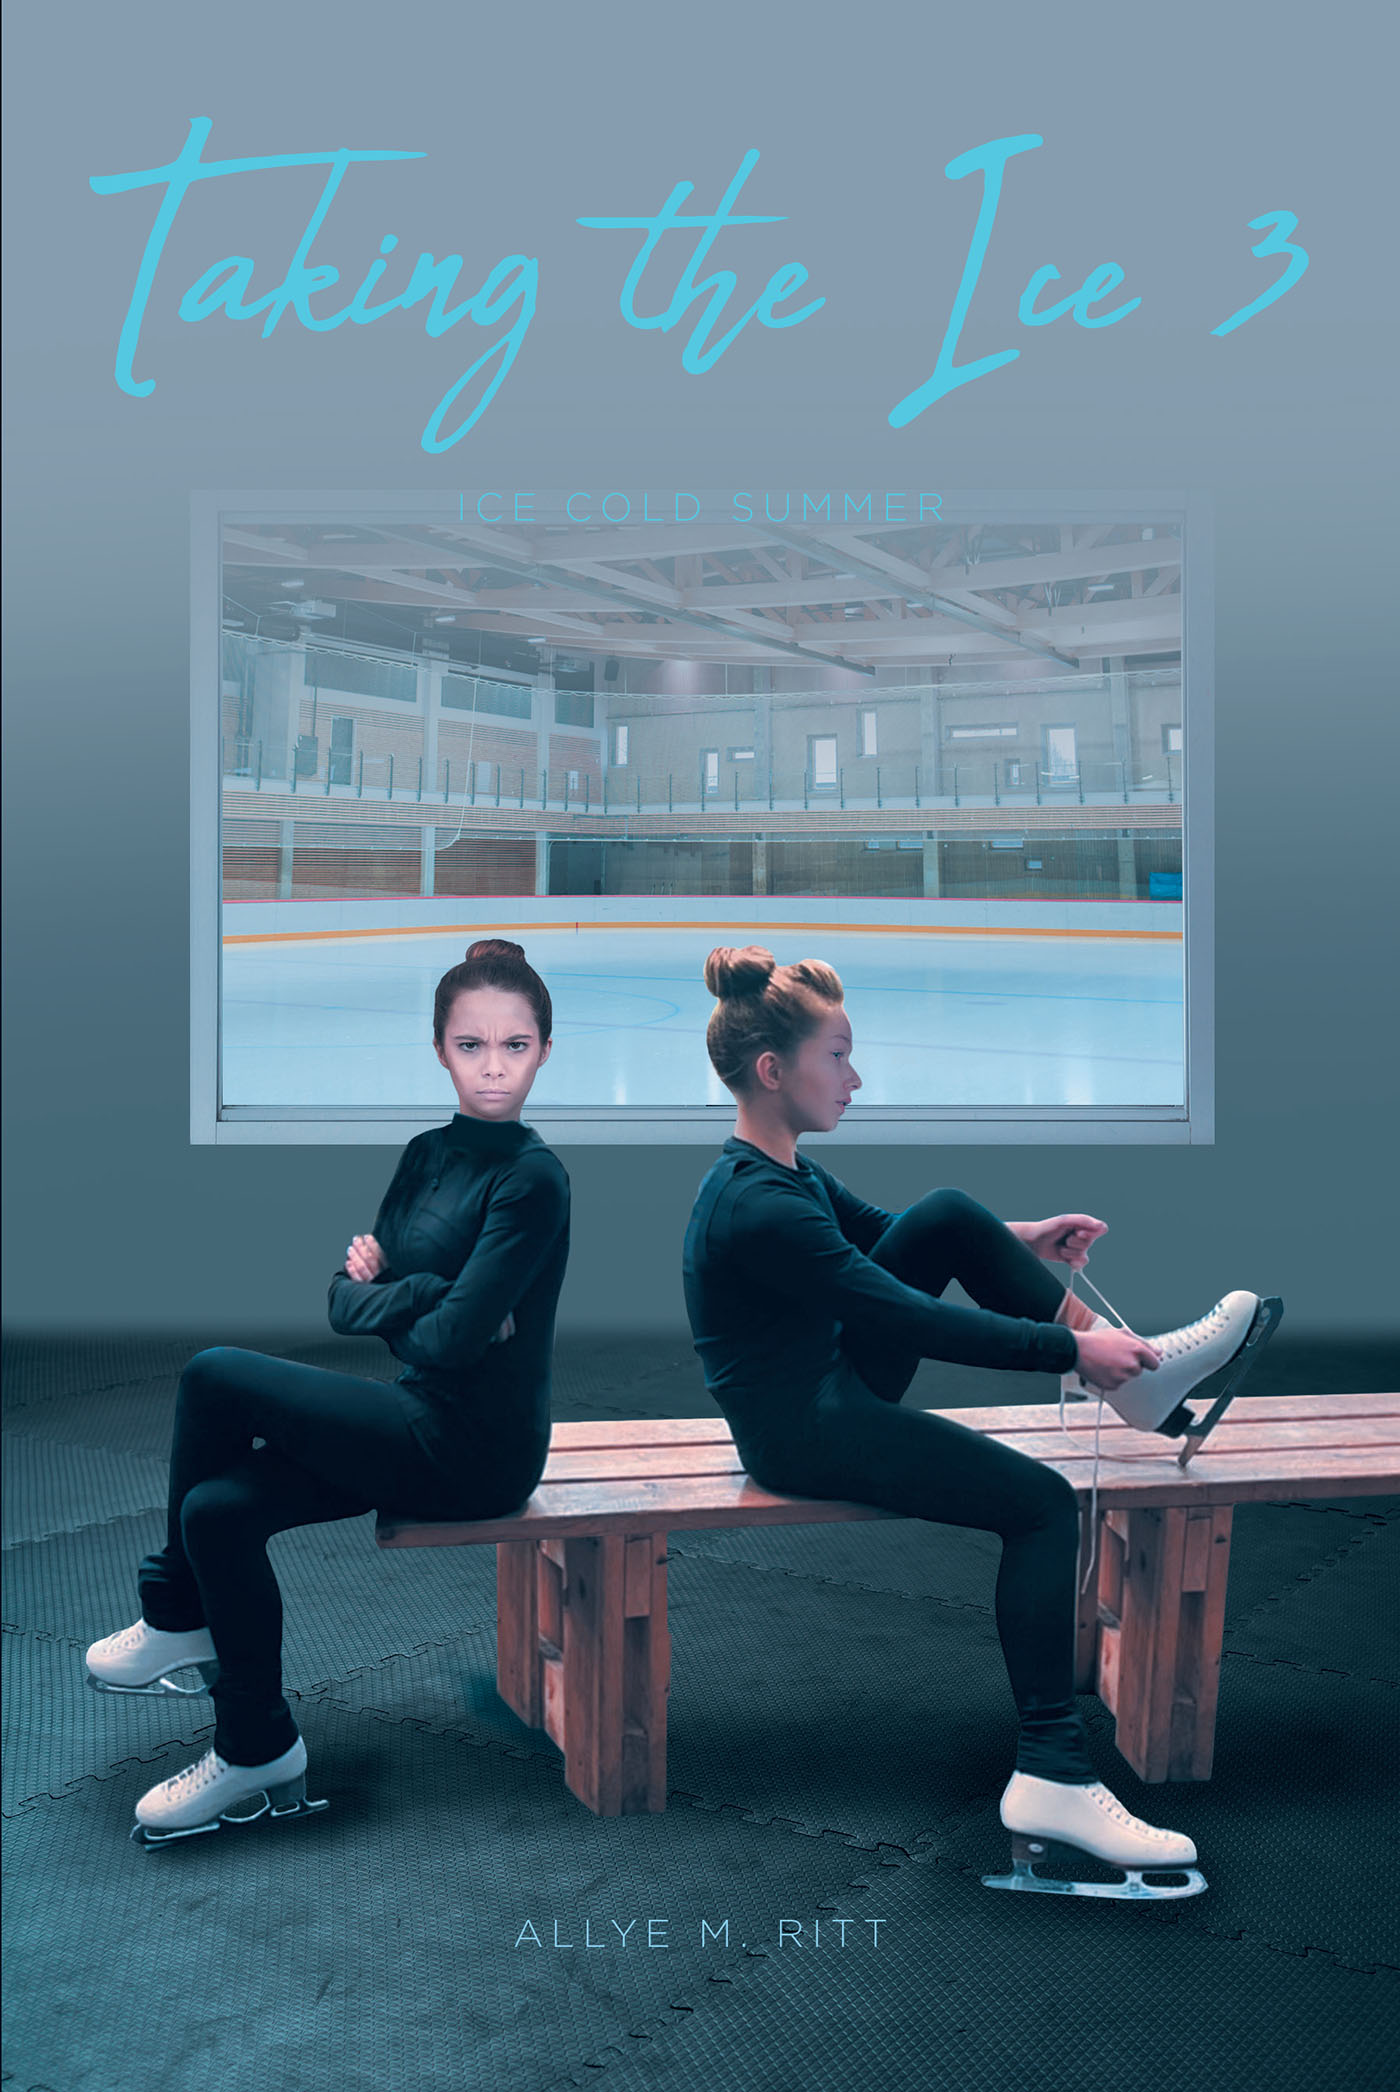 Author Allye M. Ritt’s New Book, "Taking the Ice 3: Ice Cold Summer," Follows a Young Figure Skater, Khalli, Who Clashes with a New Girl in Town Both on and Off the Ice